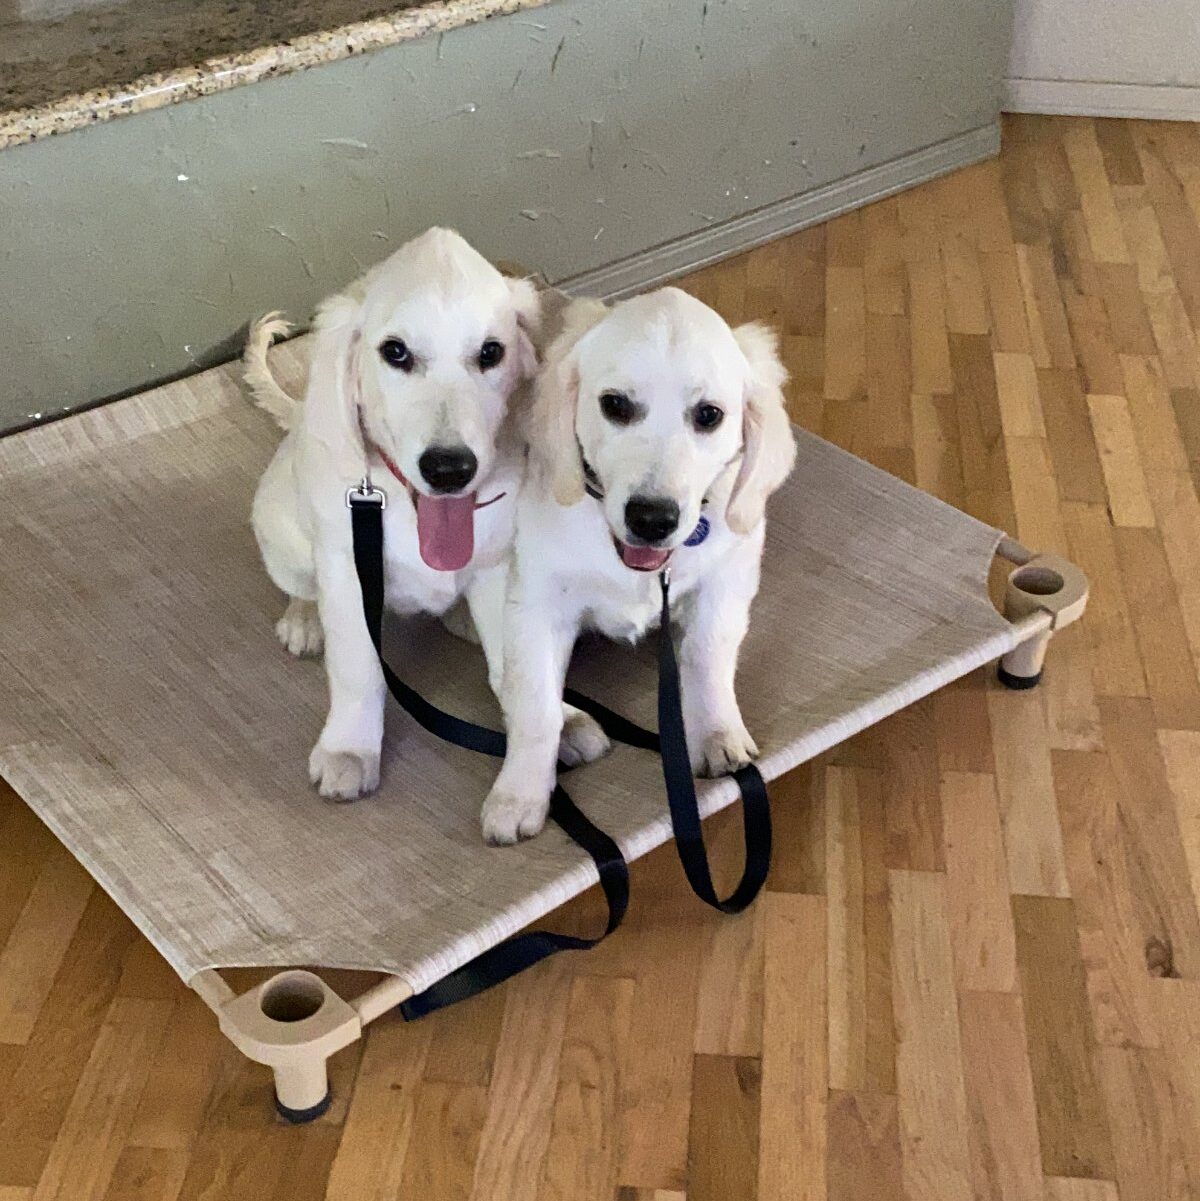 two cute pups learning how to stay on "place" together calmly as part of their training program